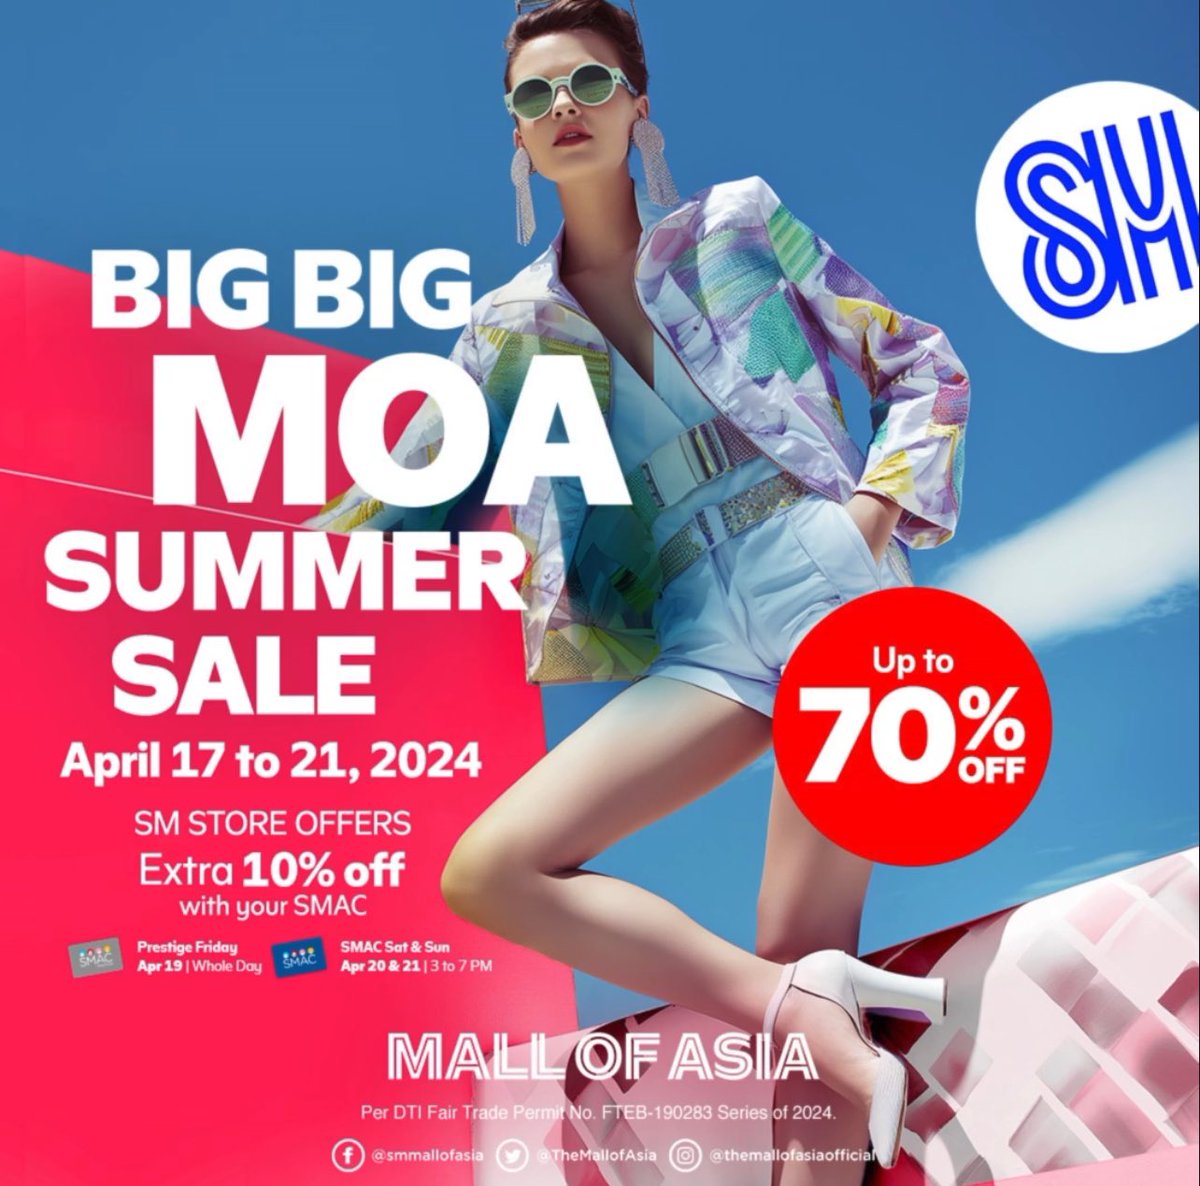 Mark your calendars for the ultimate shopping experience! 🗓️ Don't miss the chance to score unbelievable discounts of up to 70% off at the Big Big MOA Summer Sale! Get ready to shop 'til you drop and snag incredible deals on your favorite brands. See you there! 💯🤗🫶🏻